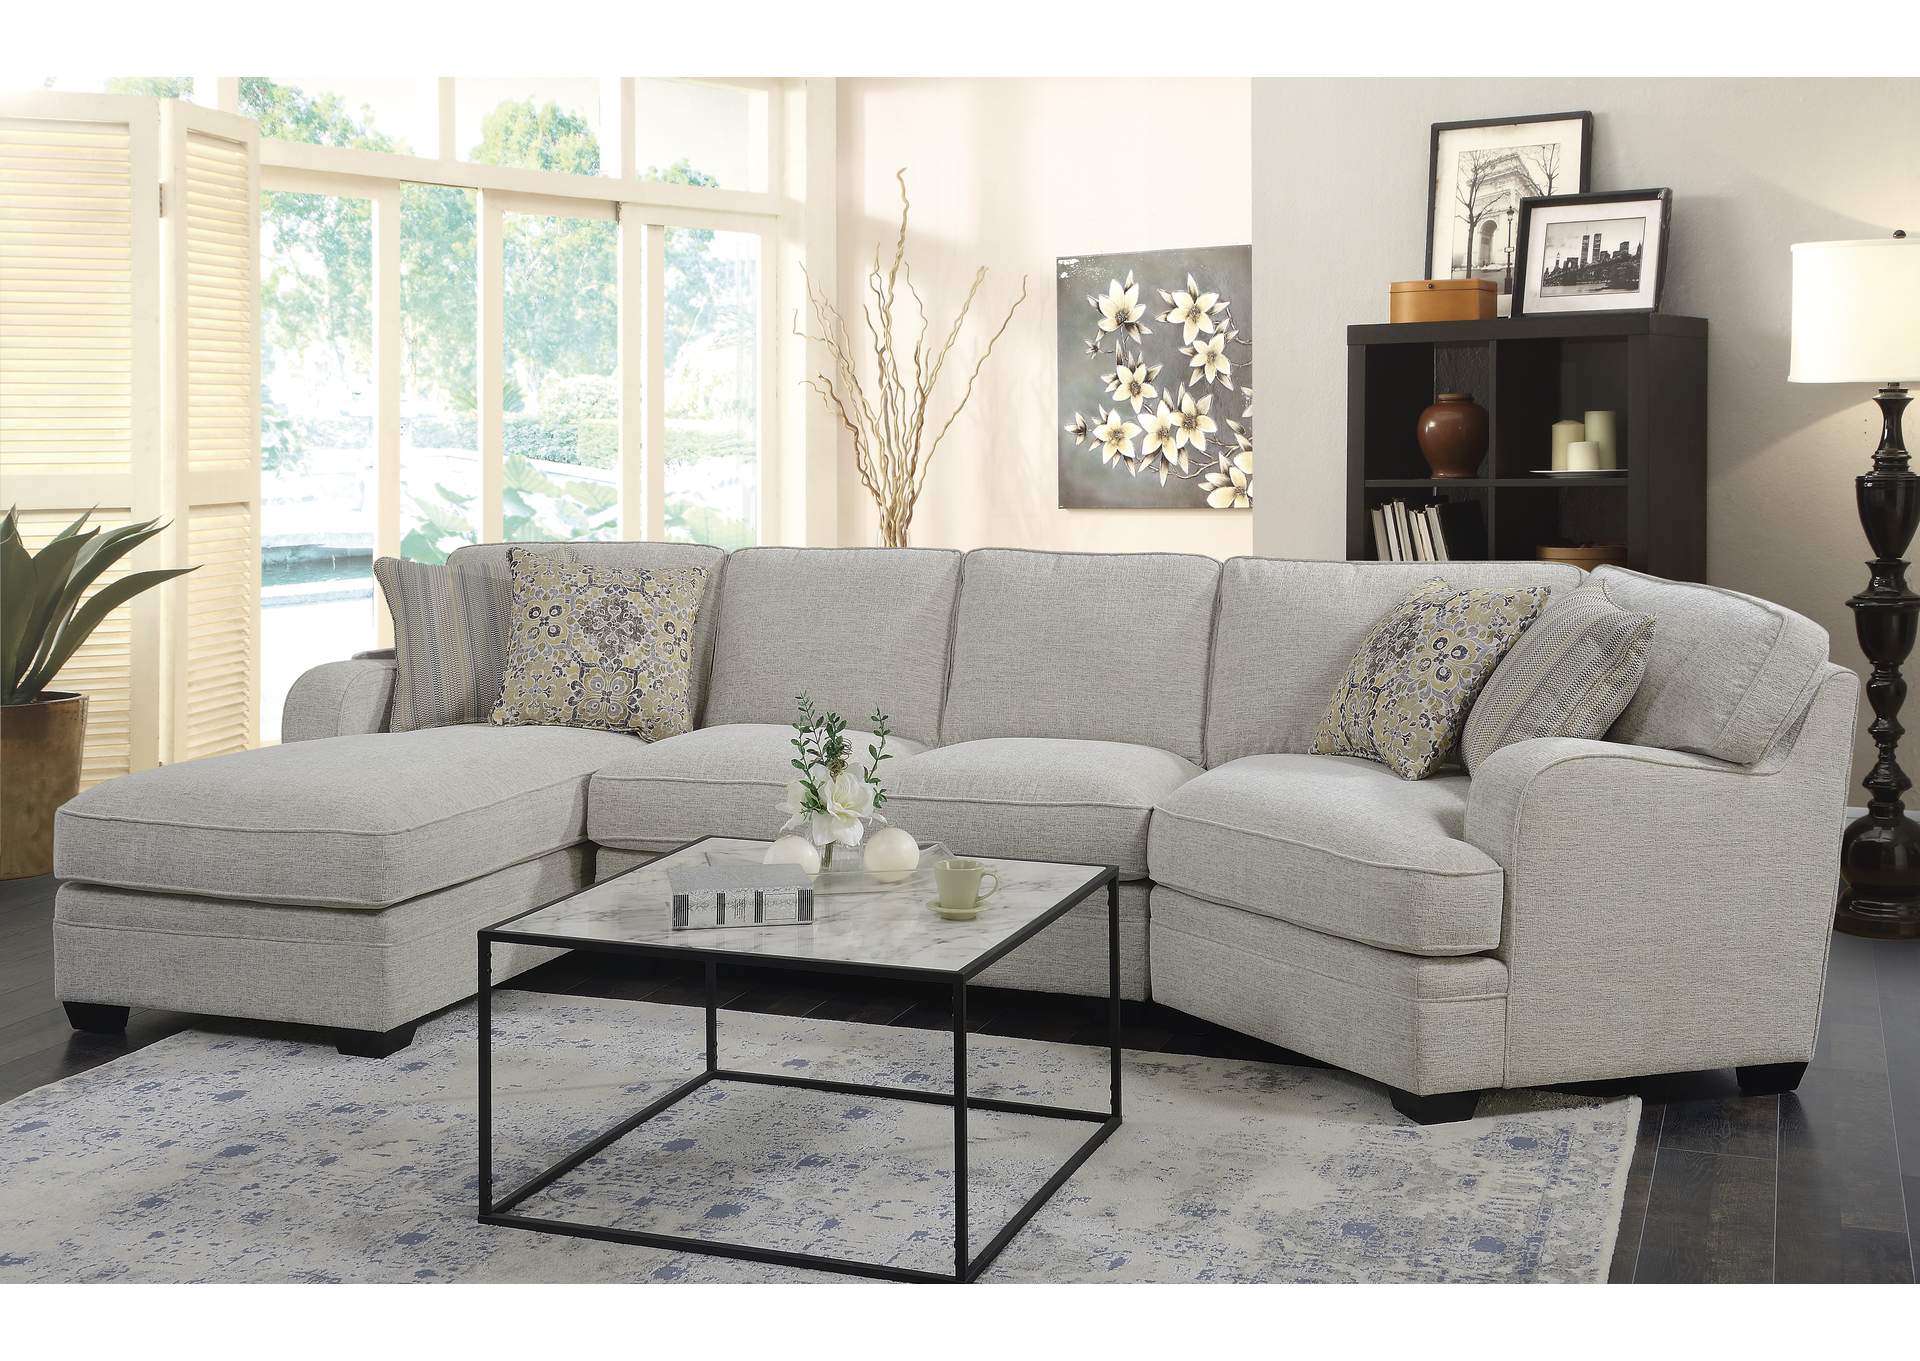 Analiese Lsf Chaise Sectional,Emerald Home Furnishings